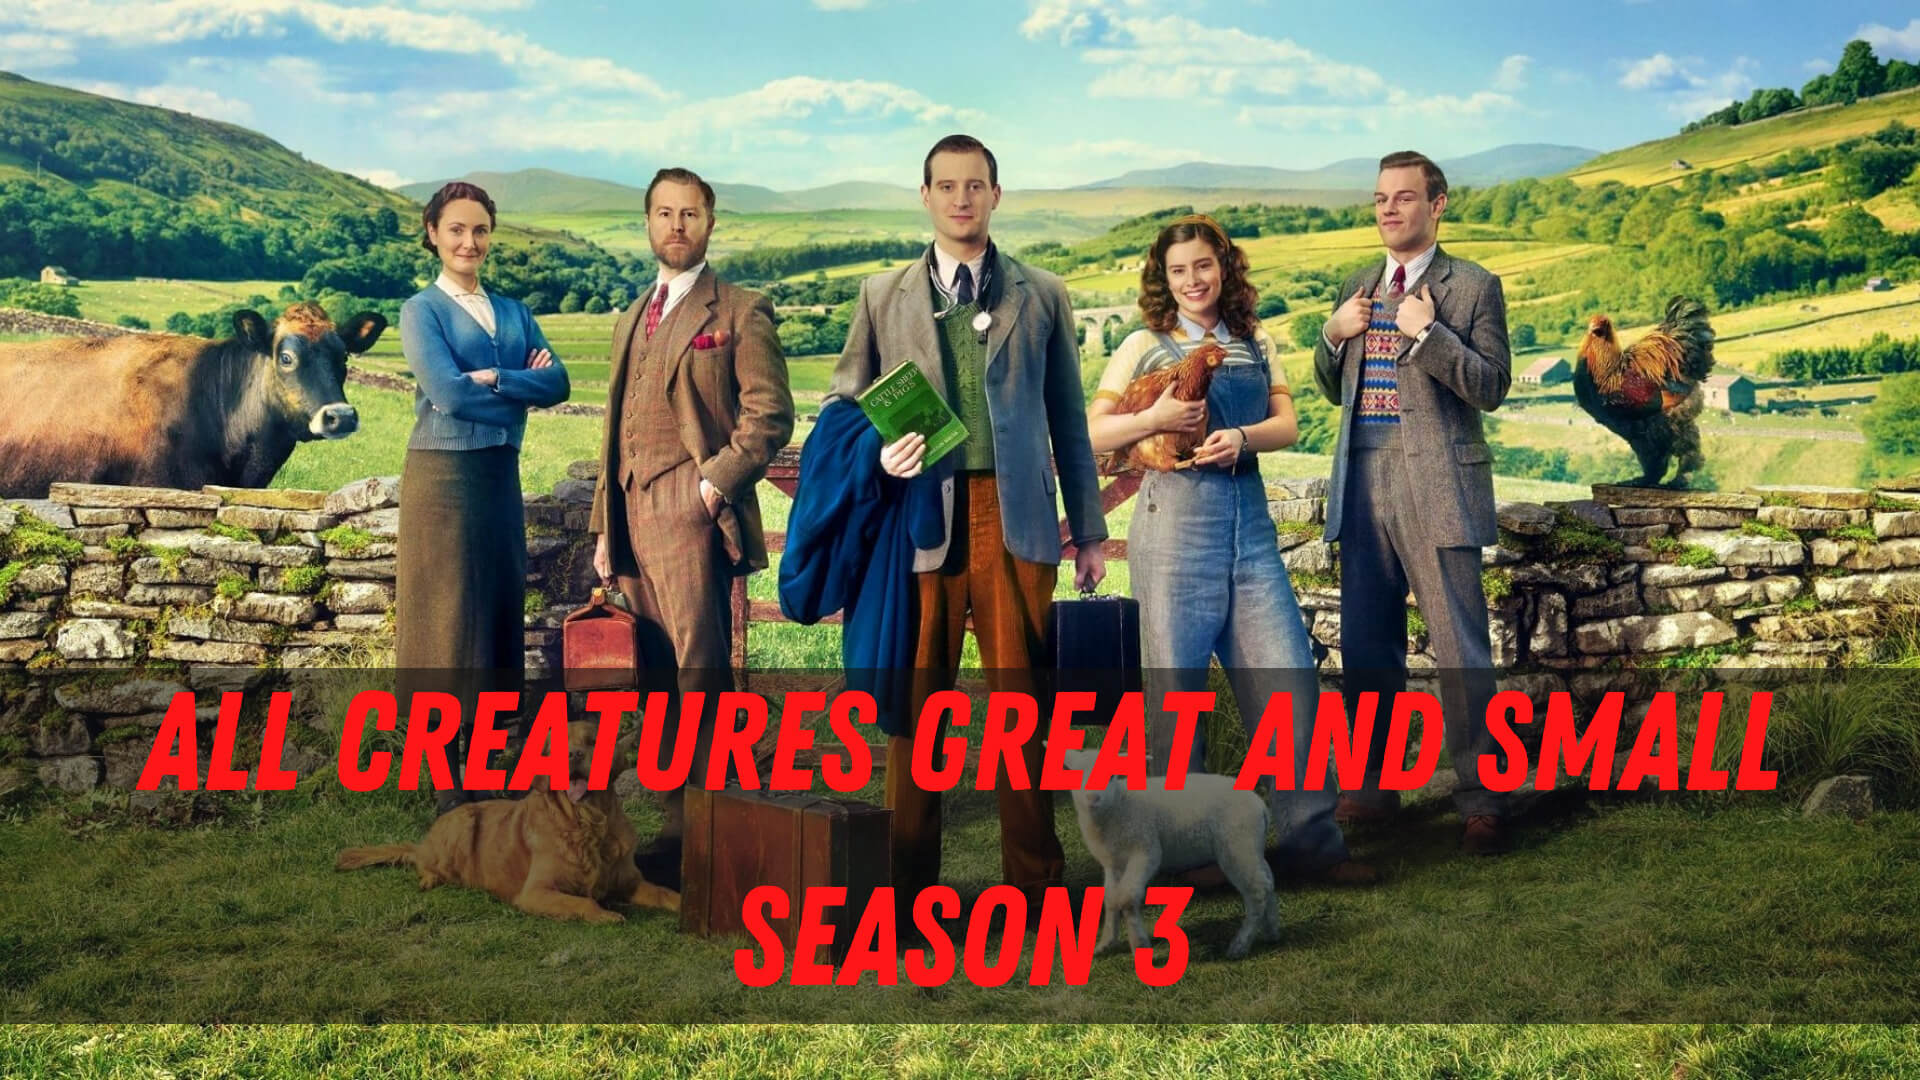 All Creatures Great and Small season 3